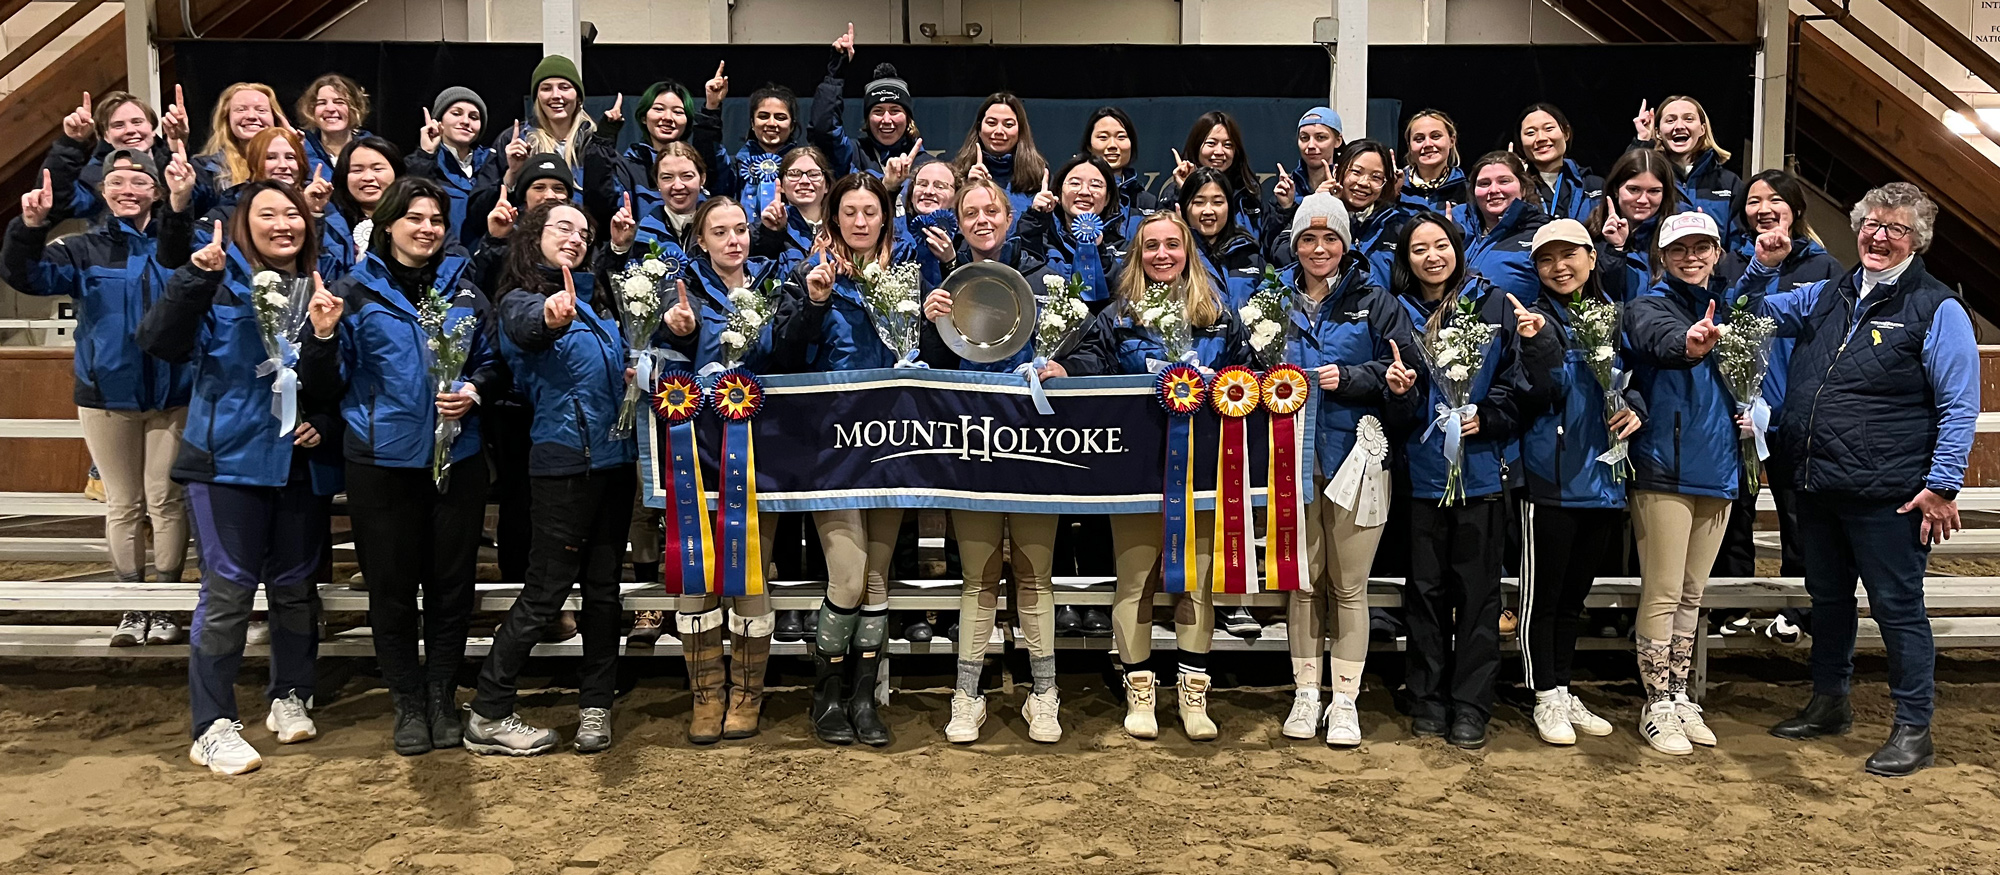 Riding team ends regular season perfect score at home show